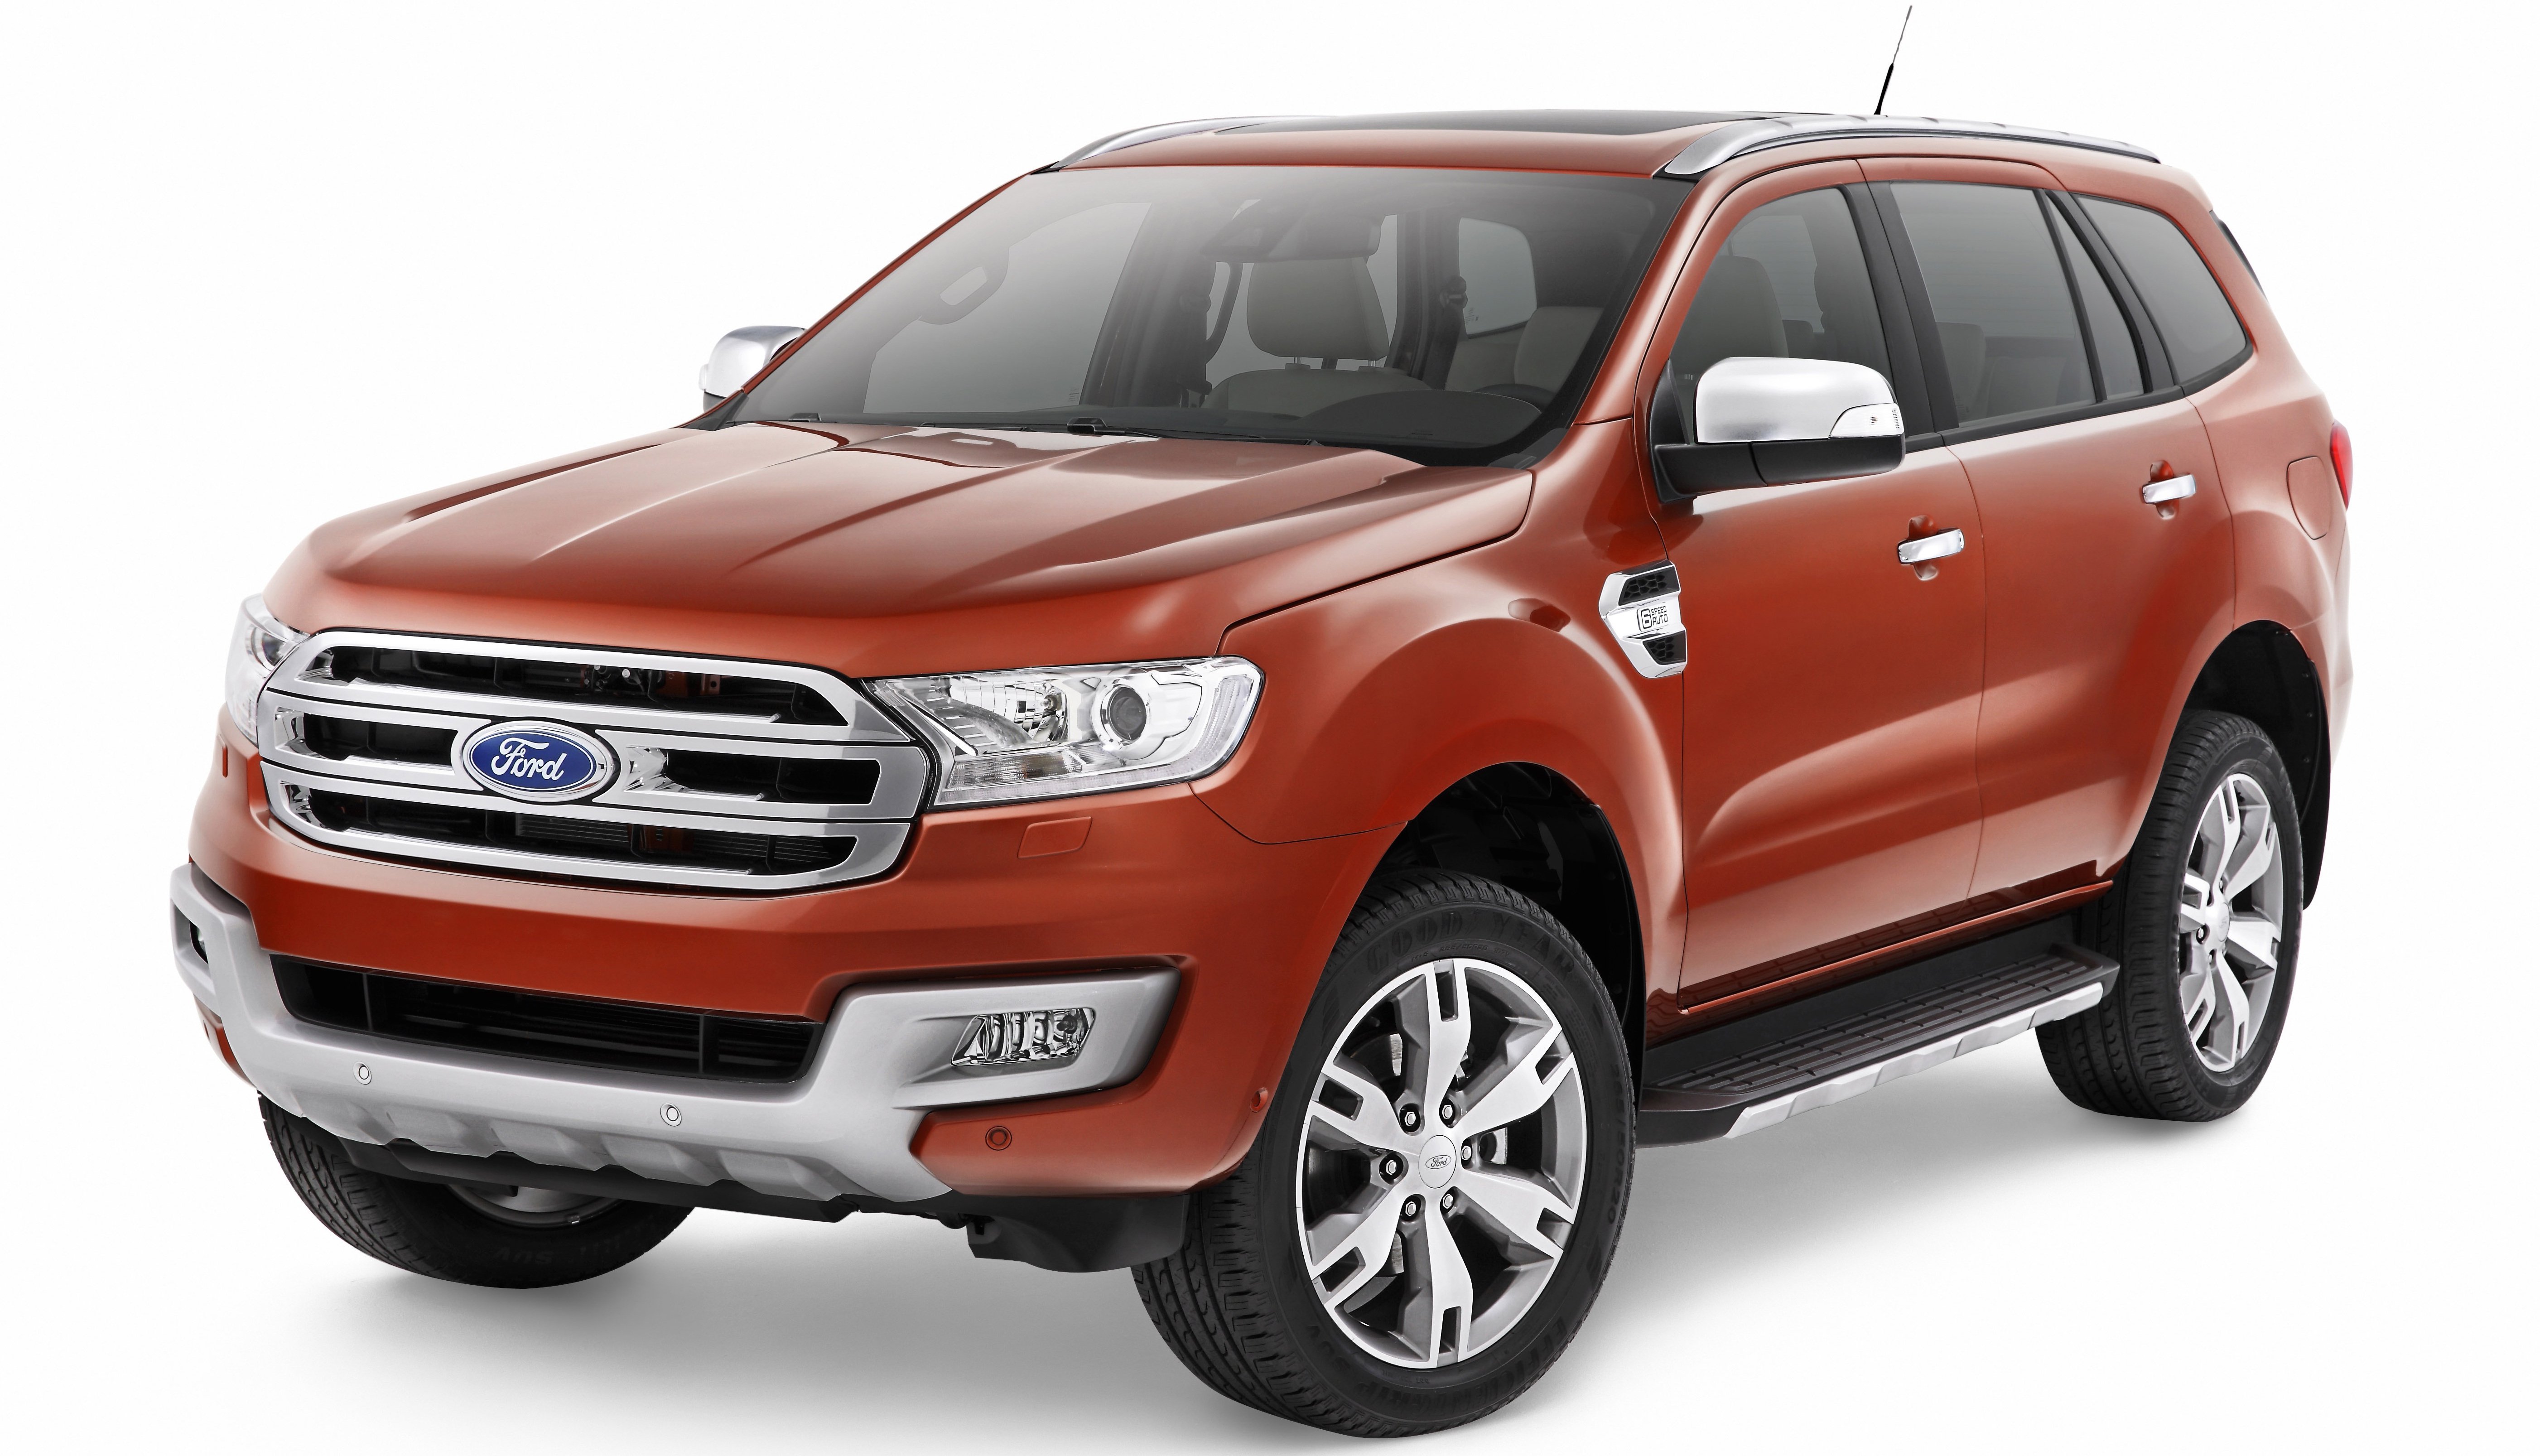 Ford Everest Backgrounds, Compatible - PC, Mobile, Gadgets| 5607x3214 px